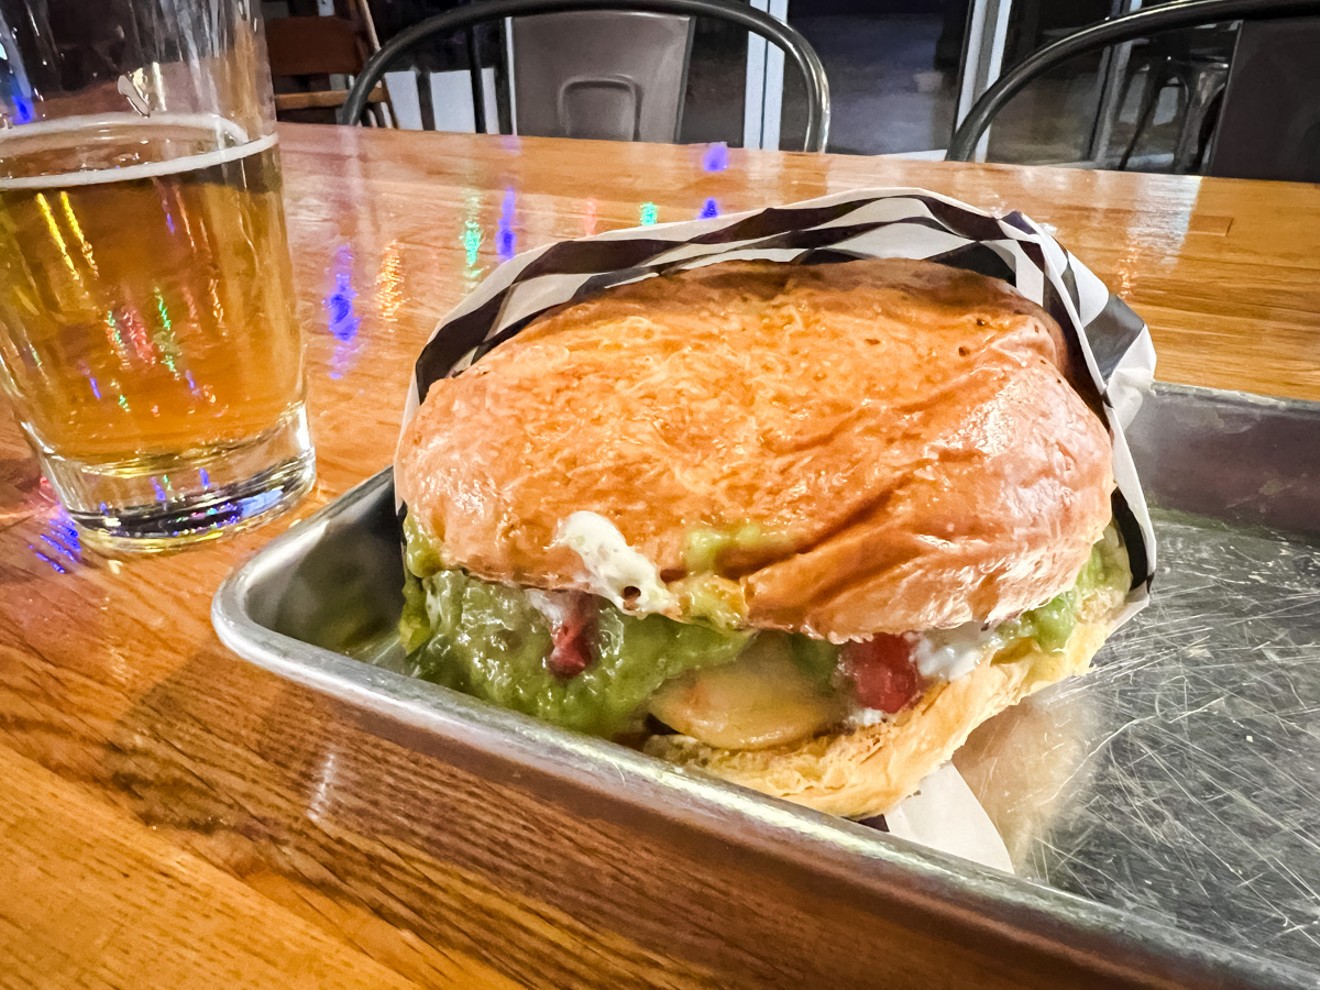 Side Hustle Burgers has popped up in East Dallas, courtesy of the same twisted geniuses who brought us Cane Rosso, Zoli's and Thunderbird Pies.